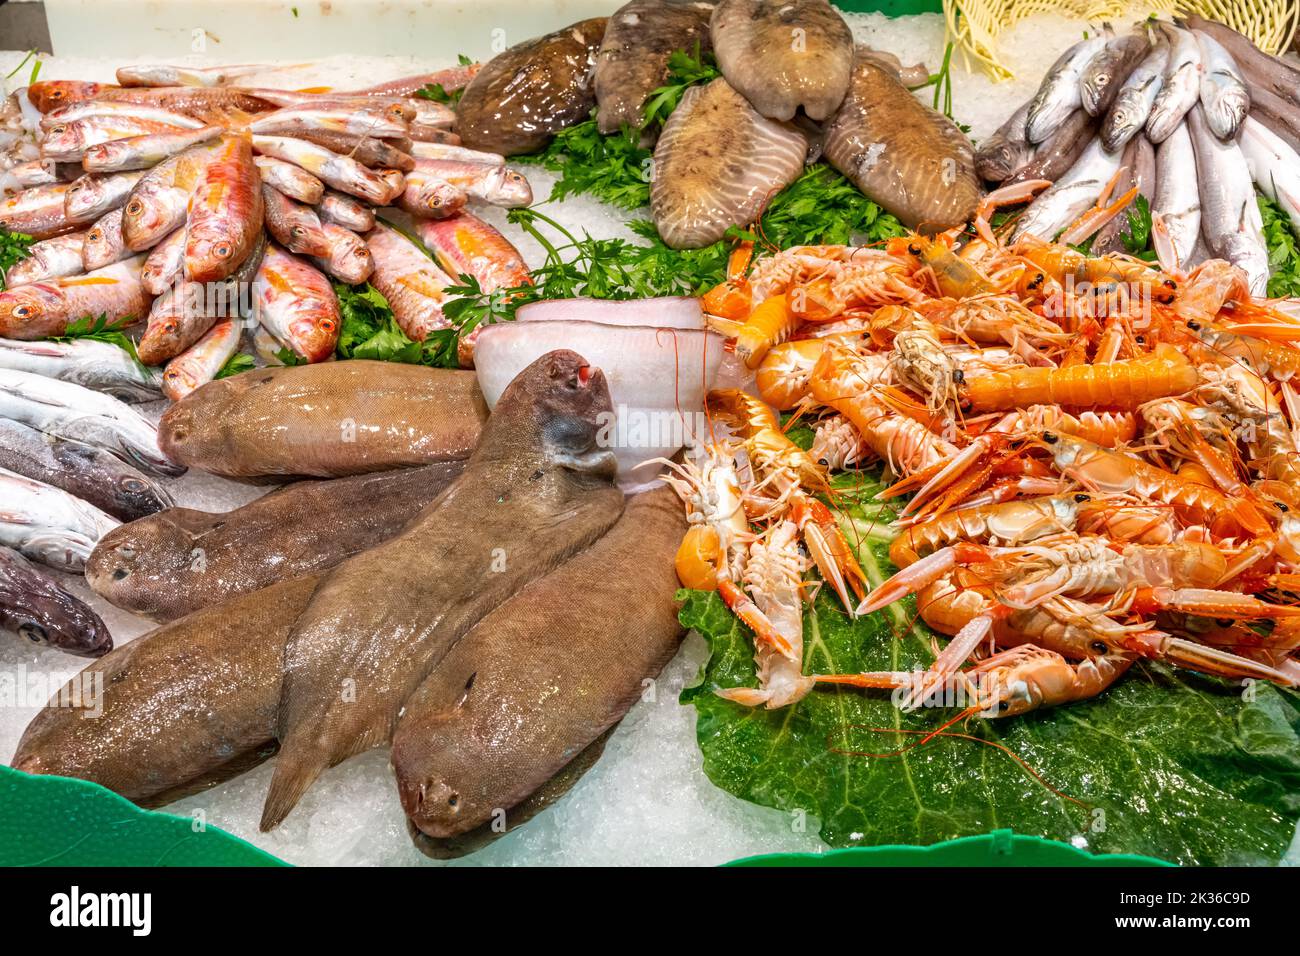 Fish and seafood on ice seen at a market in Barcelona, Spain Stock Photo